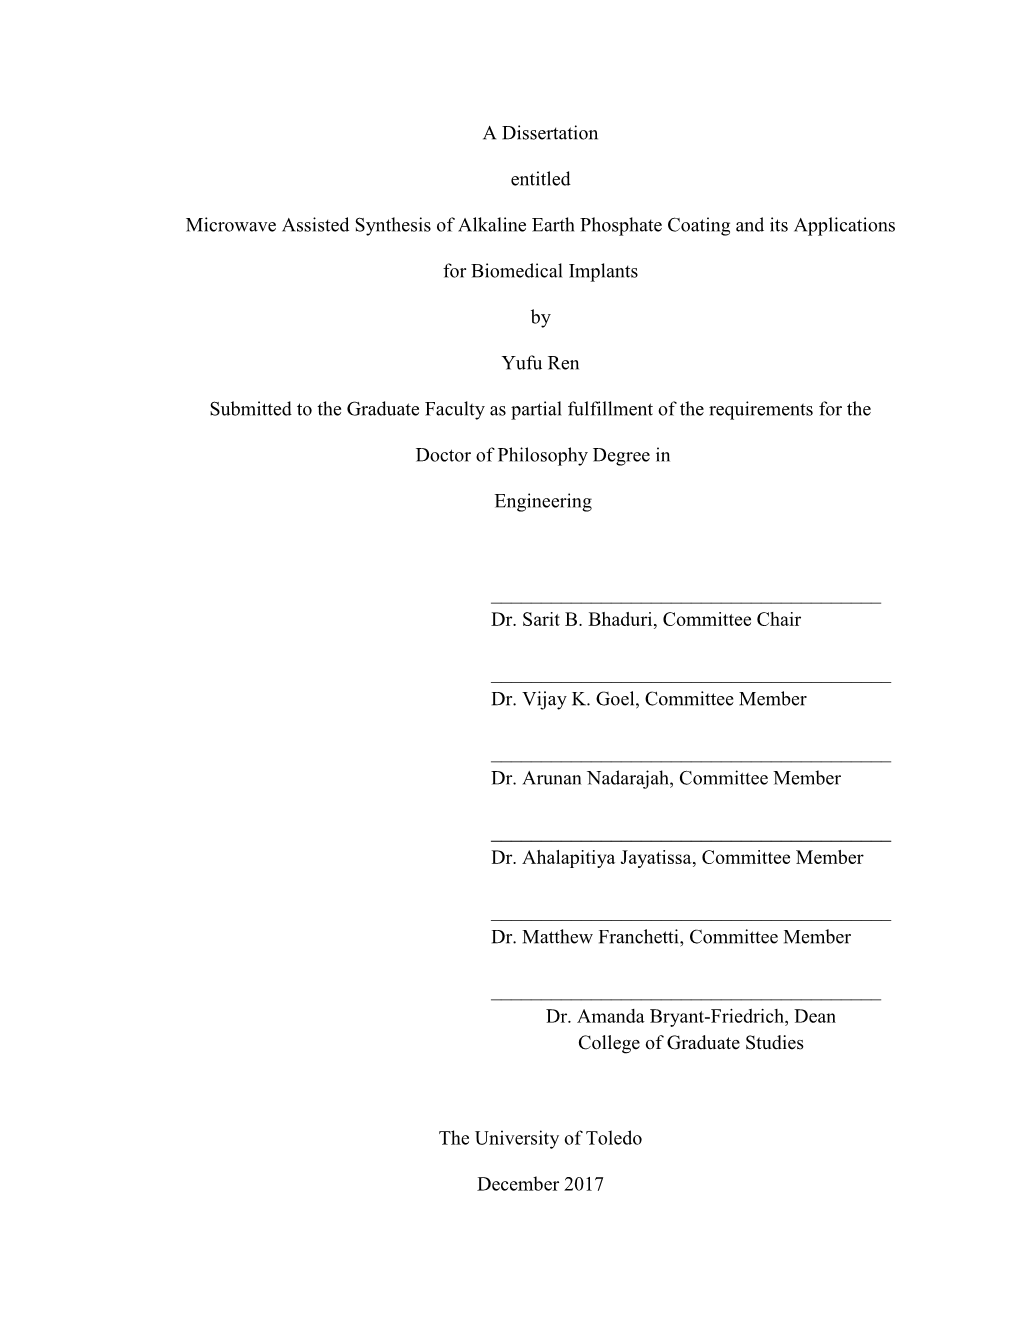 A Dissertation Entitled Microwave Assisted Synthesis of Alkaline Earth